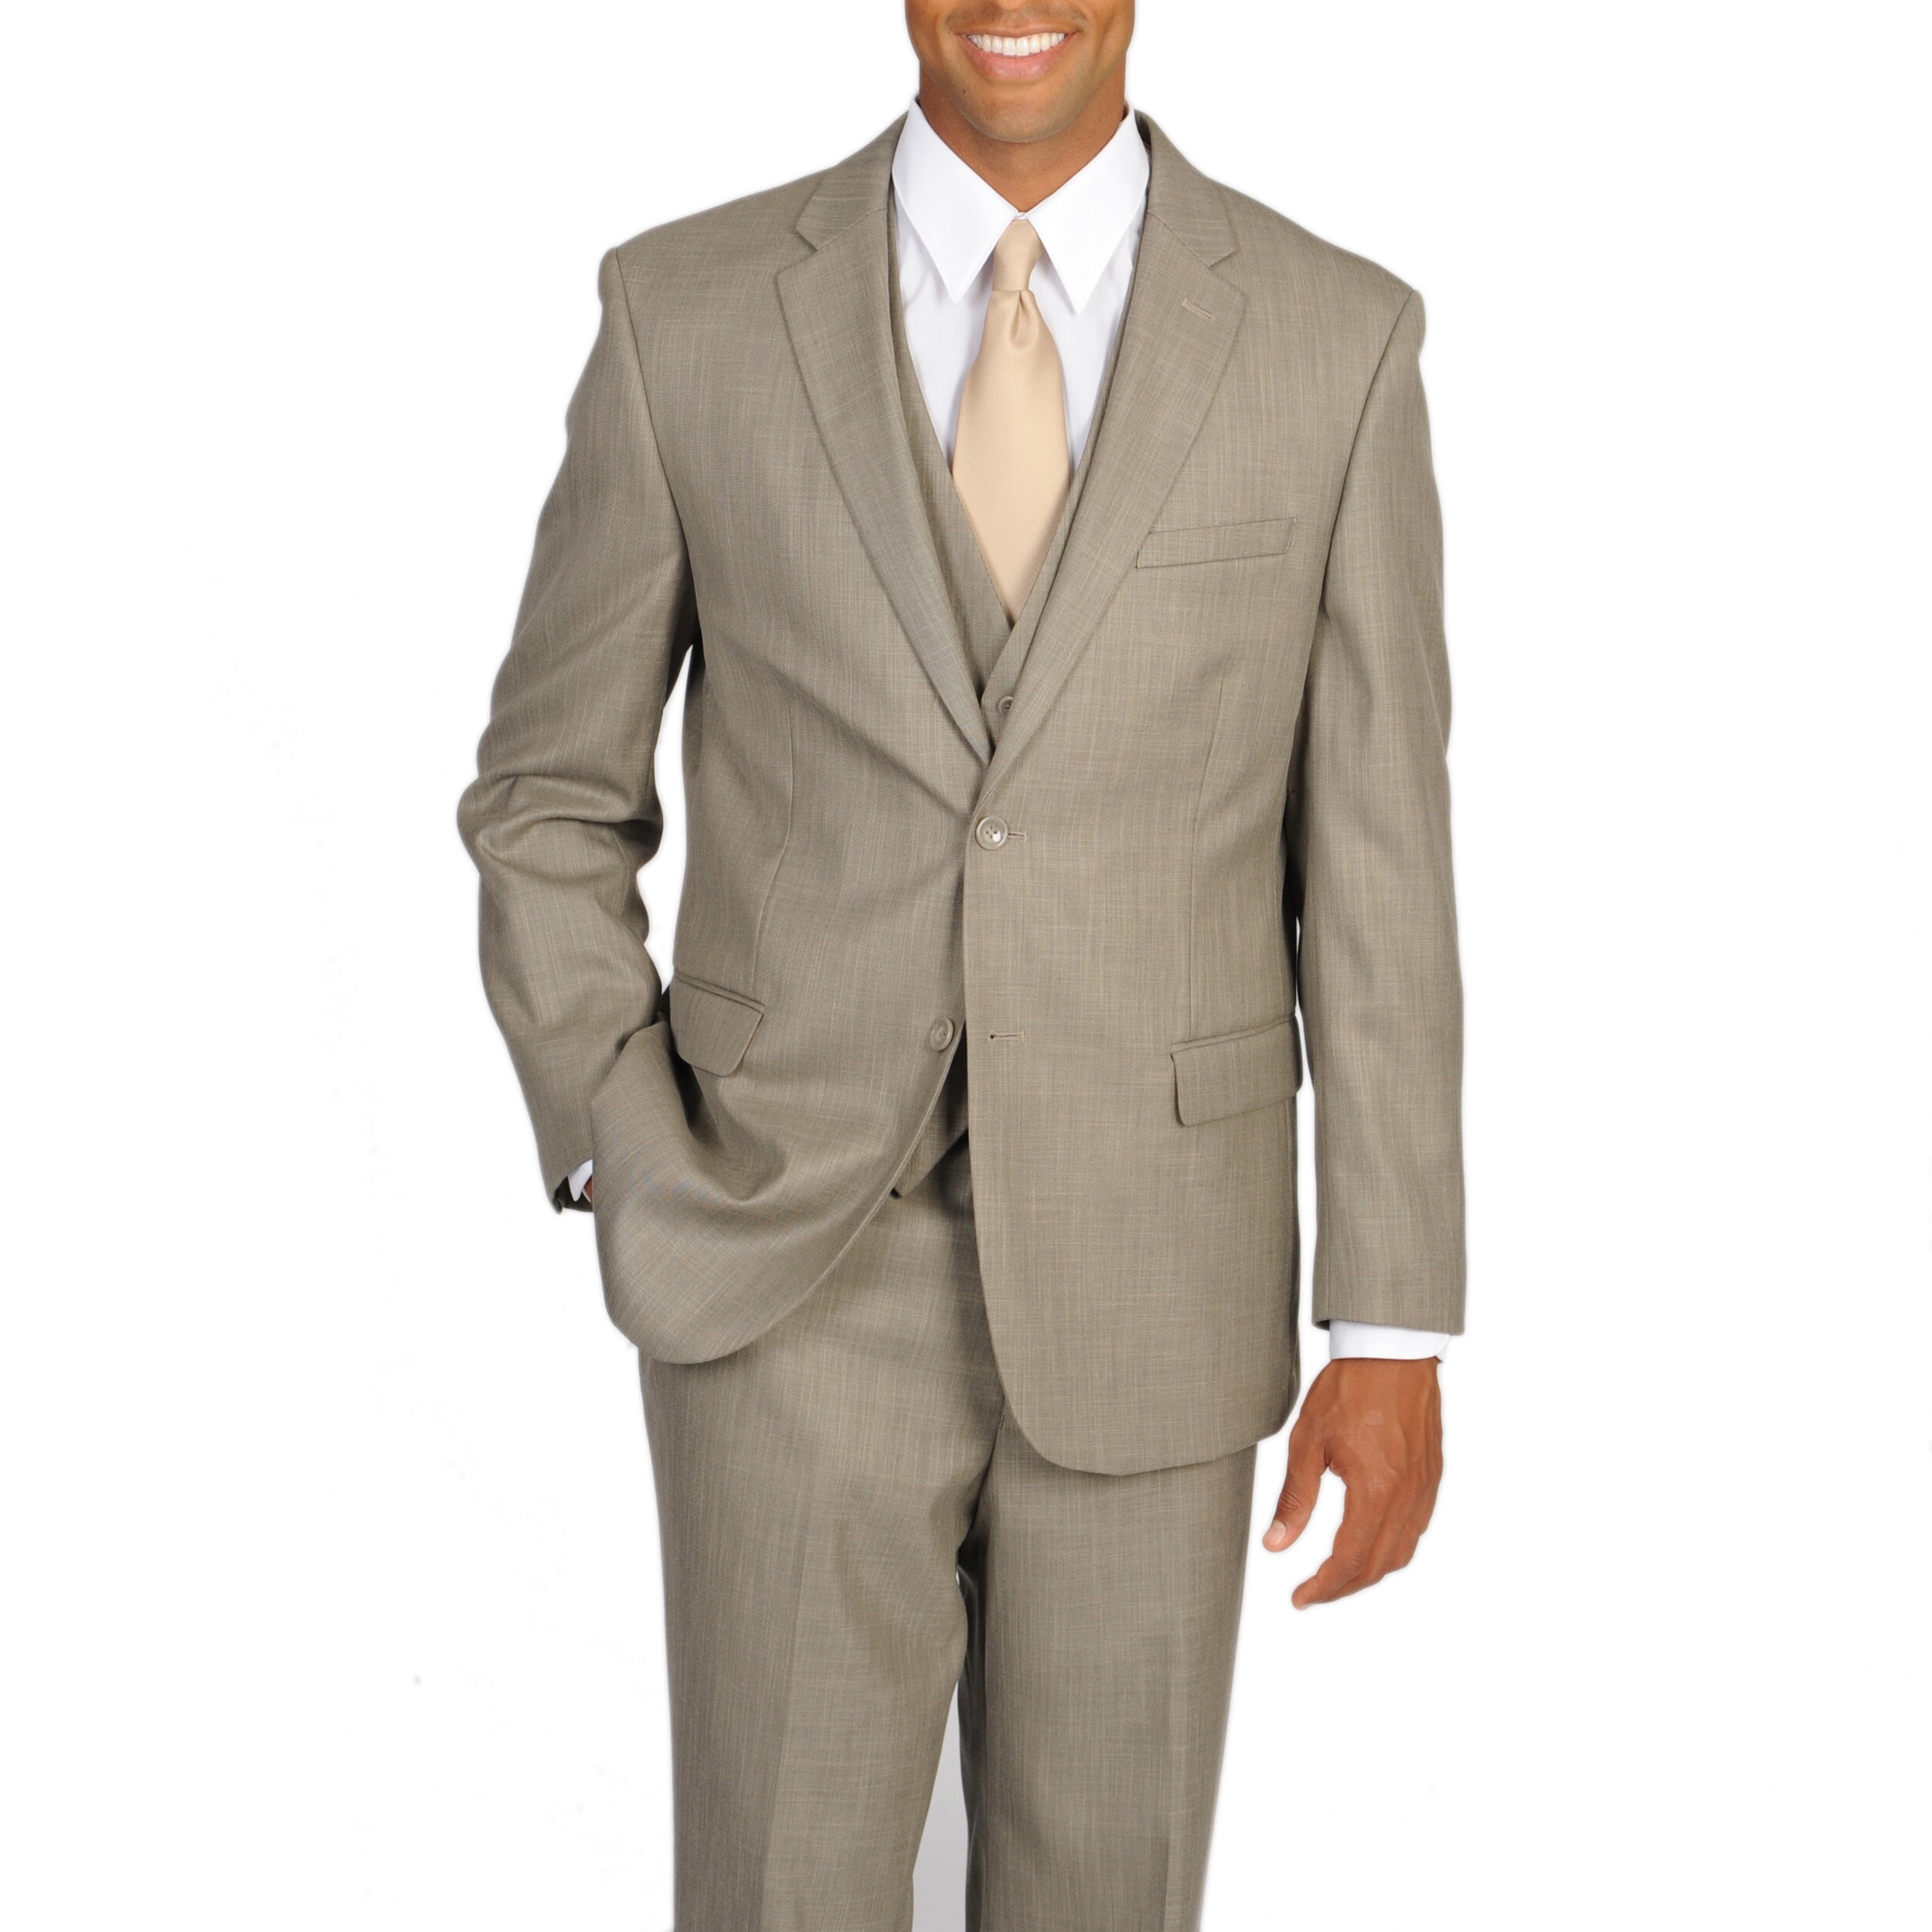 Caravelli Italy Men's Superior 150 Tan Vested 3-piece Suit - Overstock ...